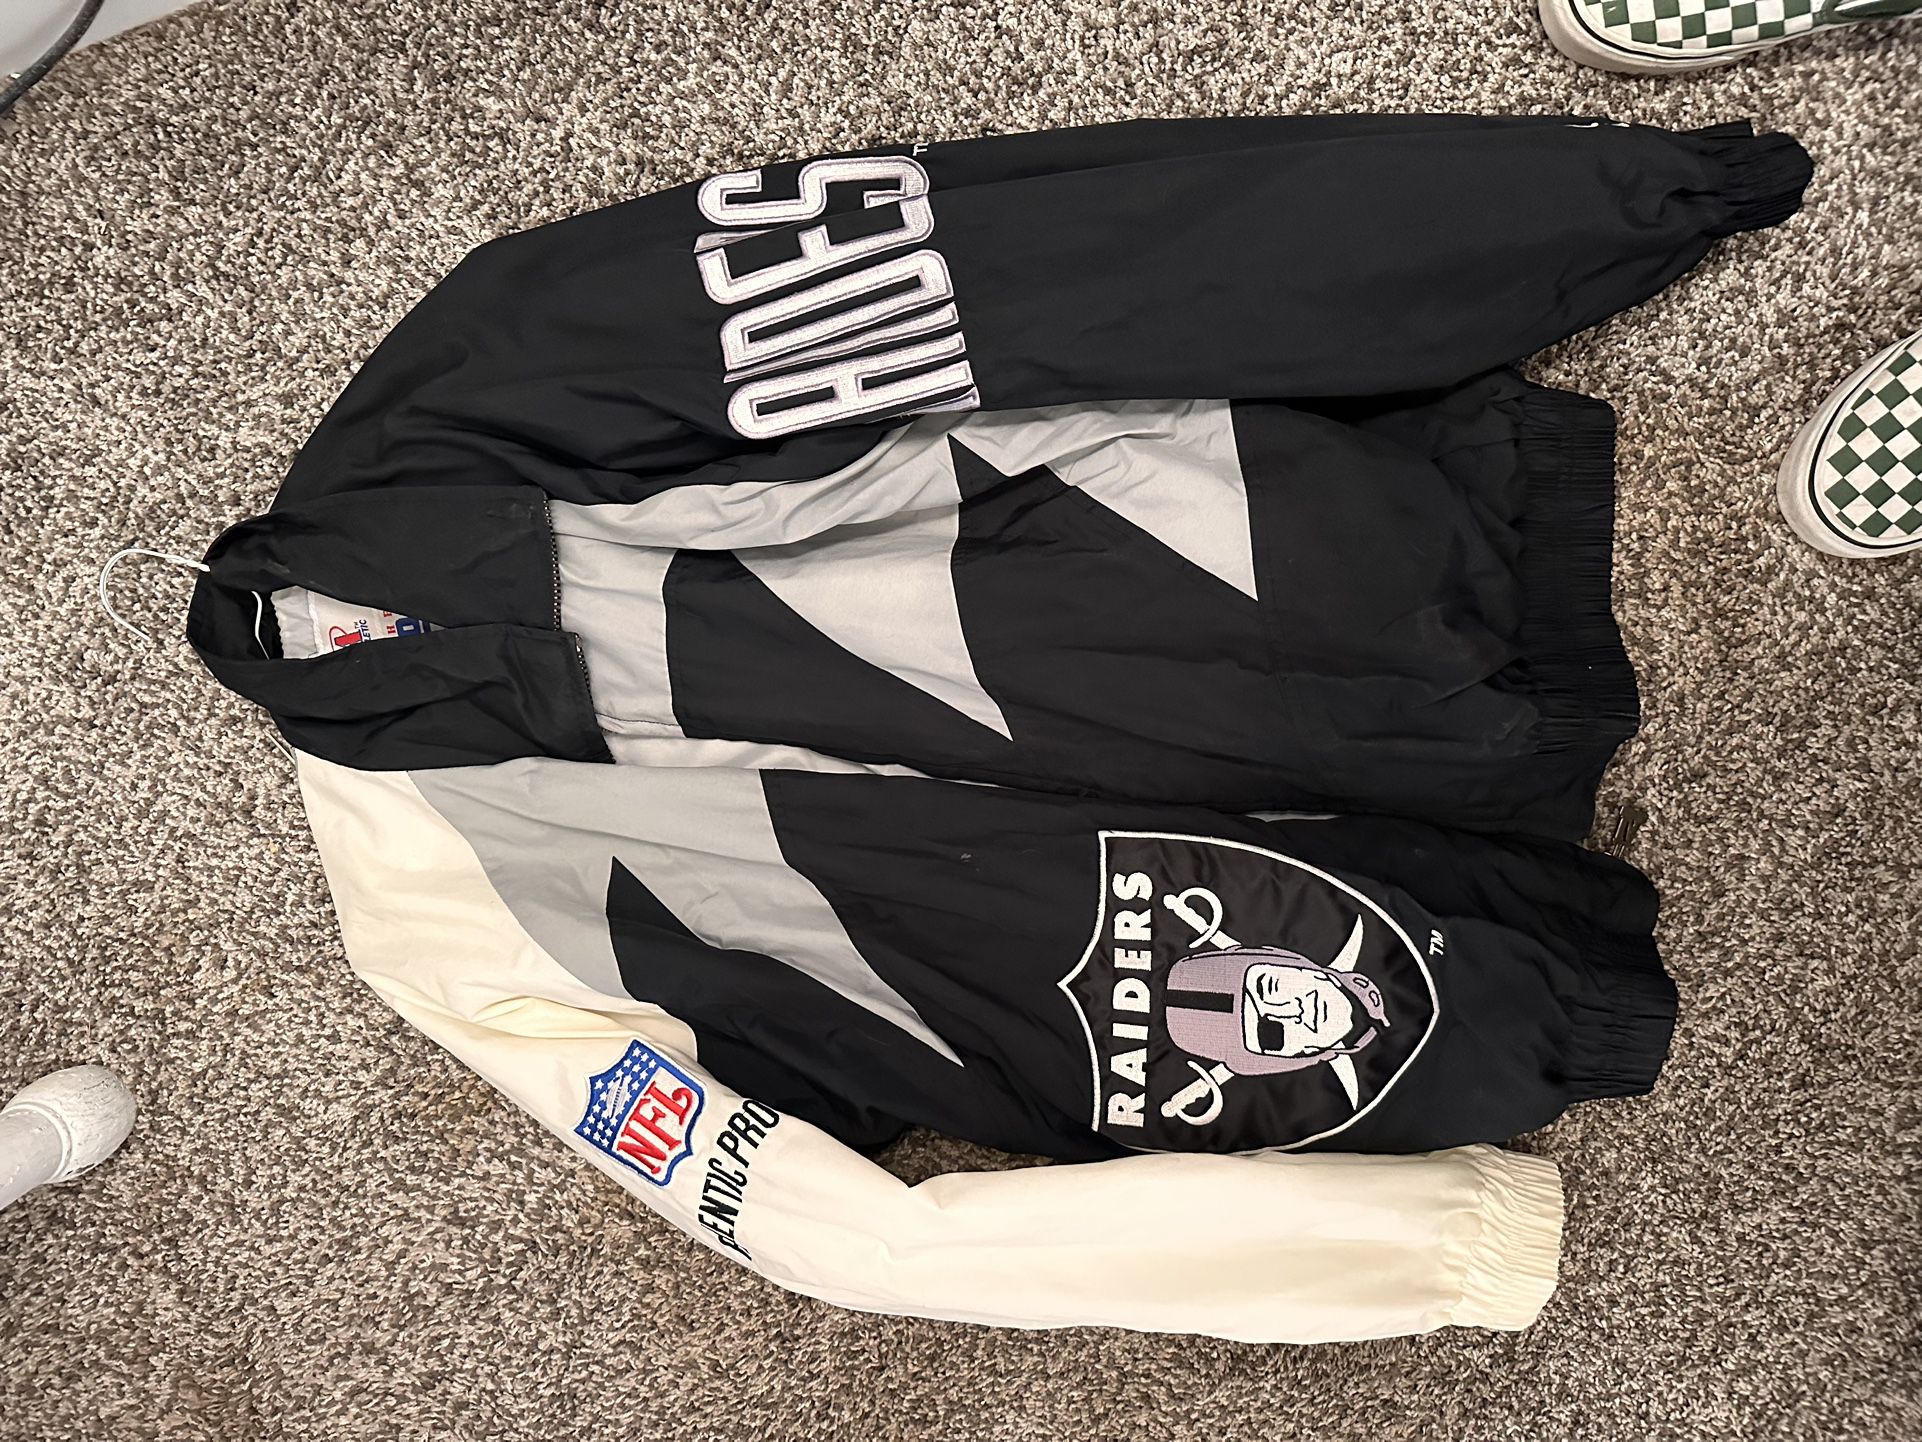 Vintage Shark tooth Raiders Jacket for Sale in Yucca Valley, CA